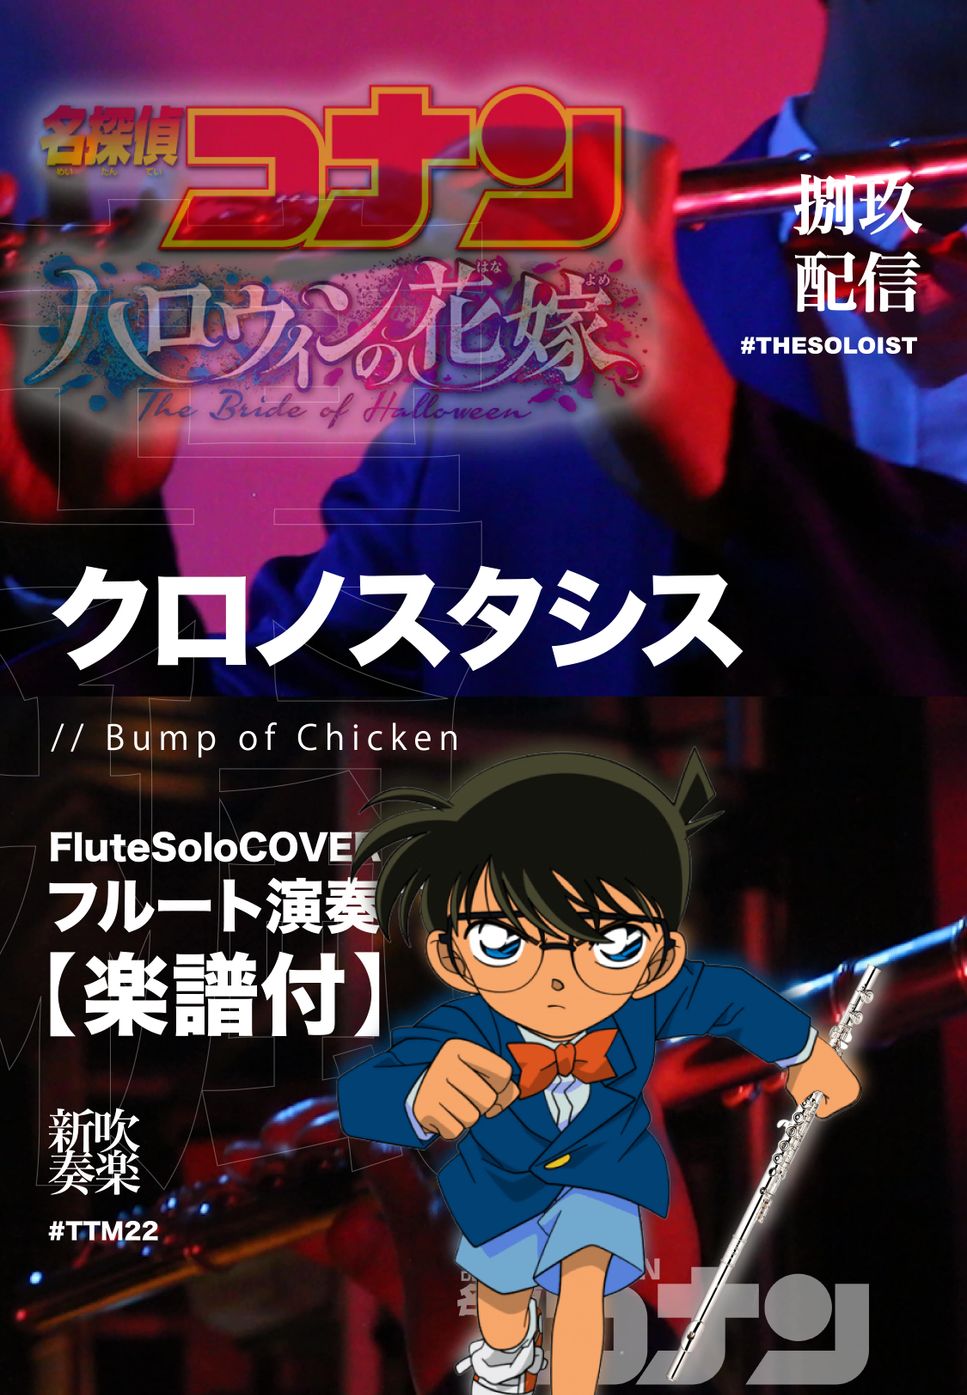 Detective Conan: The Bride of Halloween - Movie Main Theme - Chronostasis クロノスタシス (Flute Solo) by Fungyip